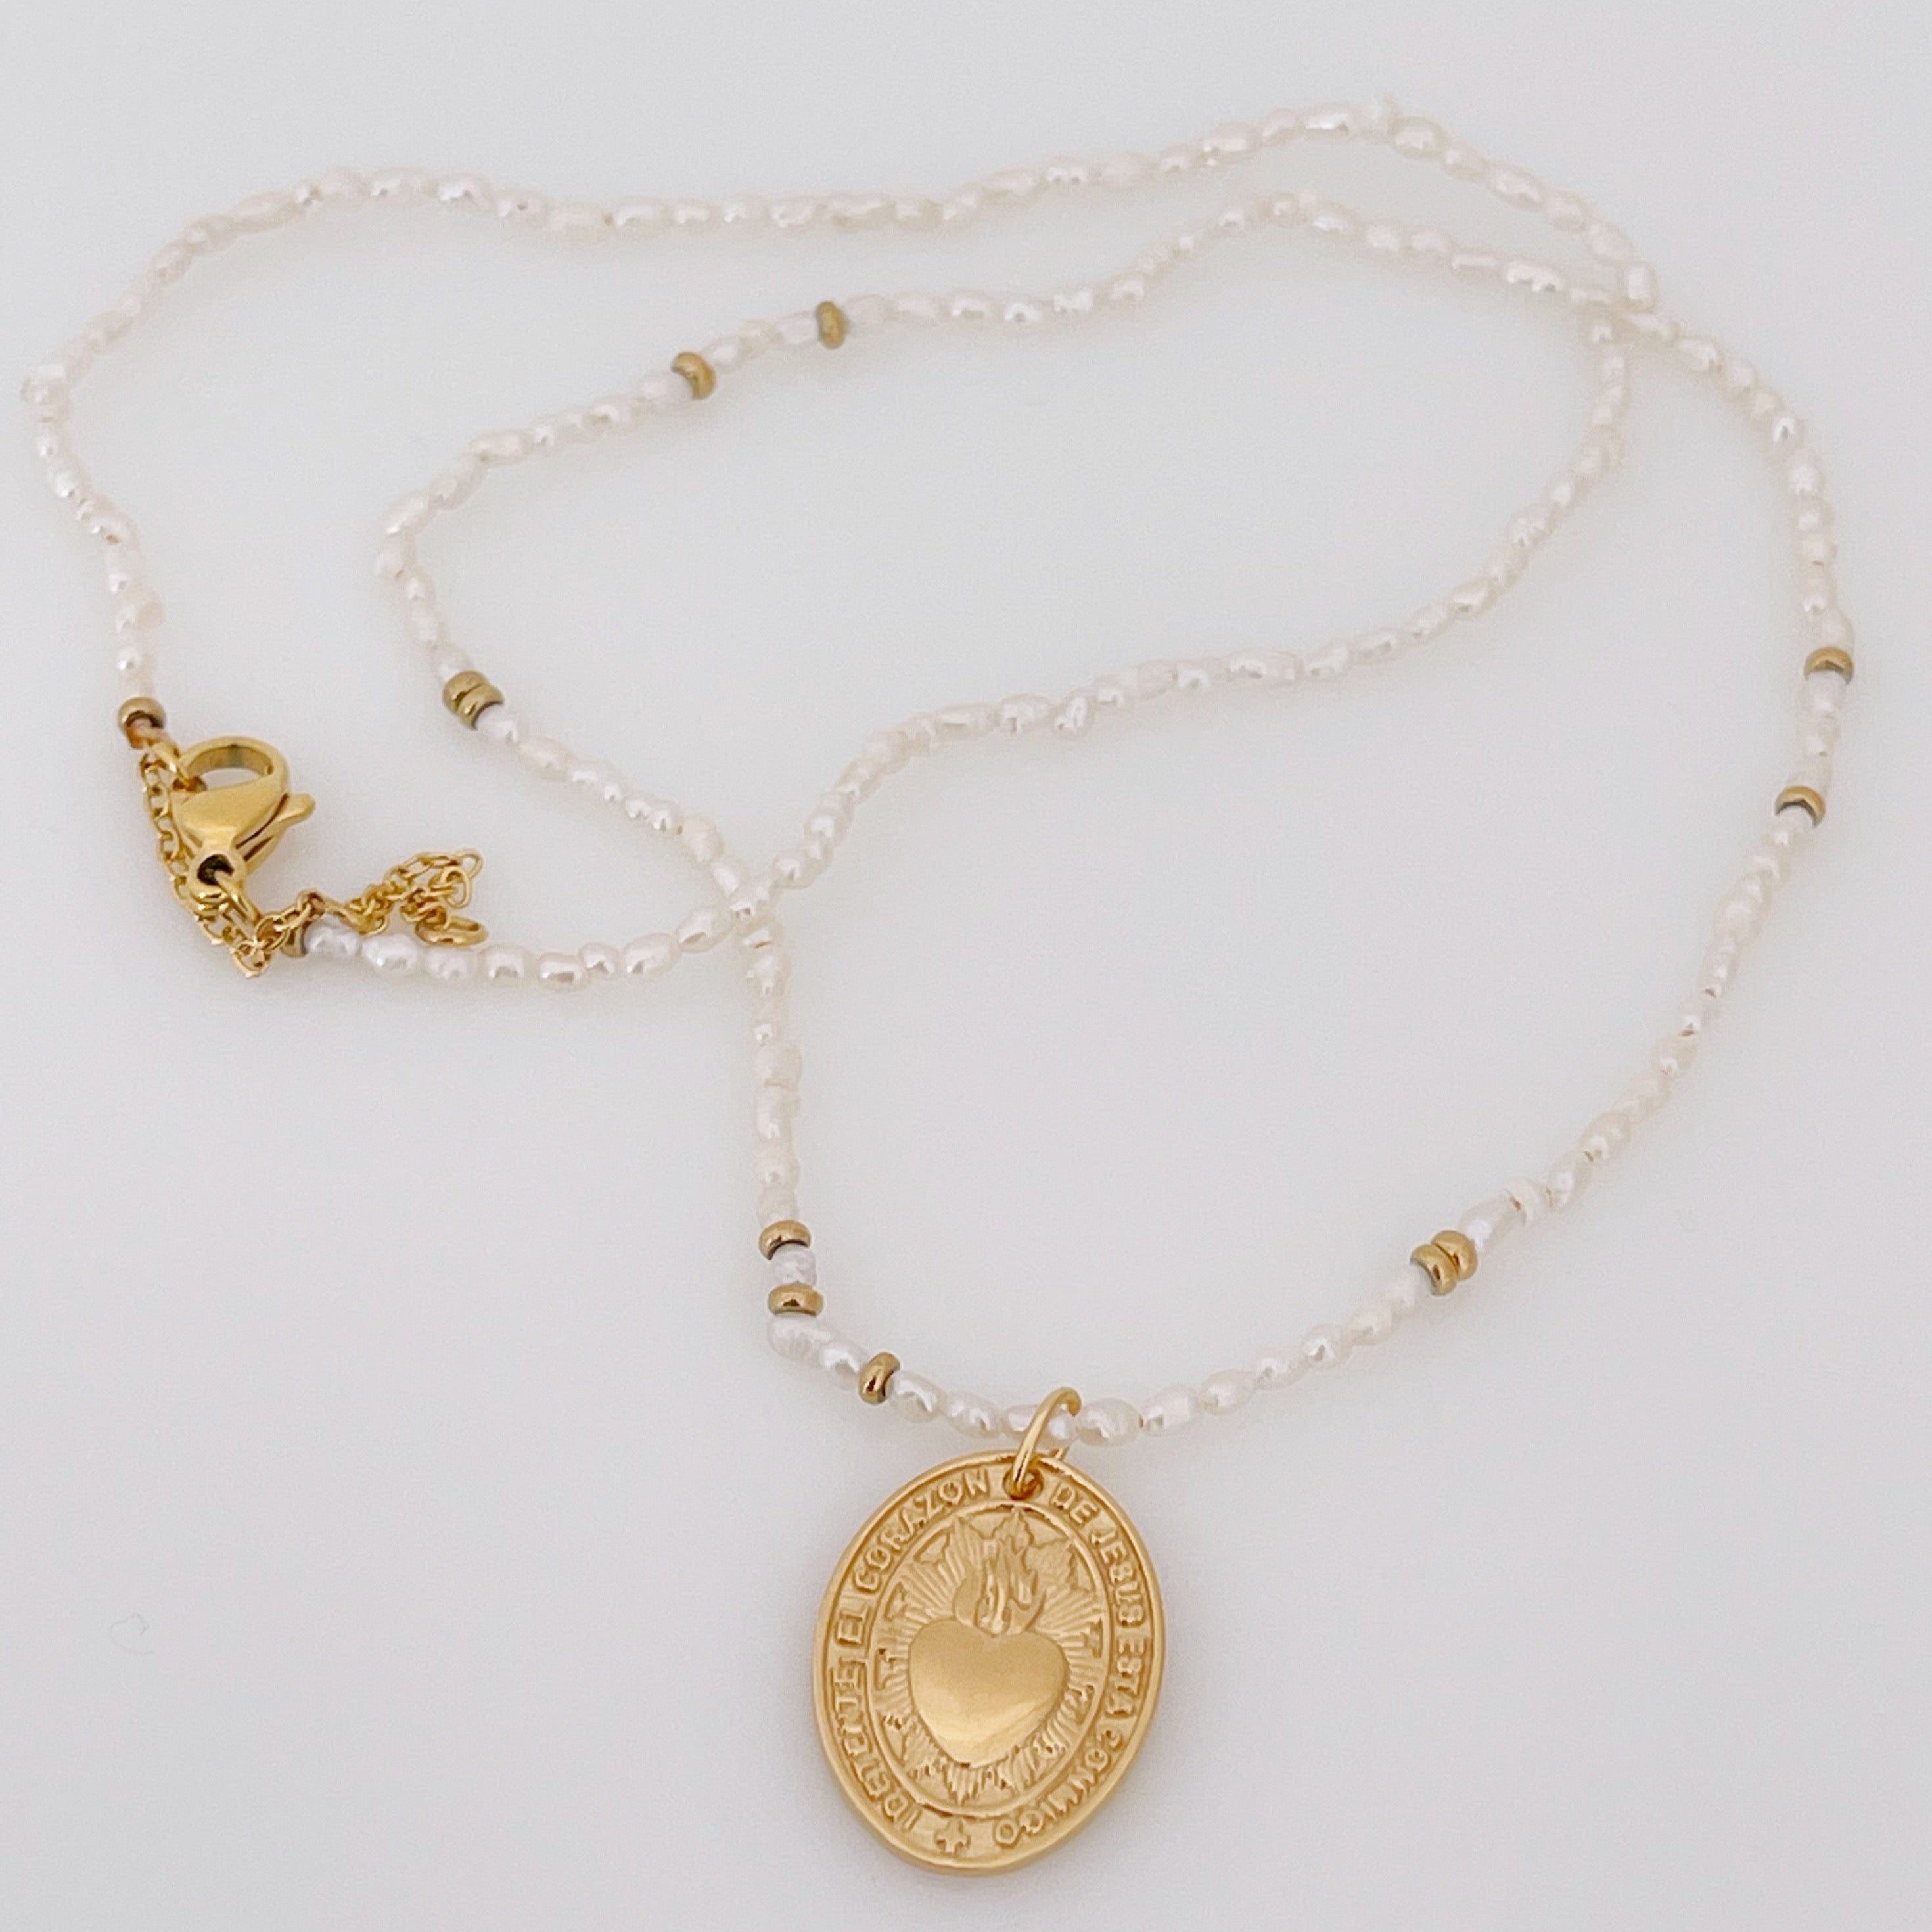 DETENTE NECKLACE IN 24K GOLD PLATED 925 STERLING SILVER WITH PEARLS